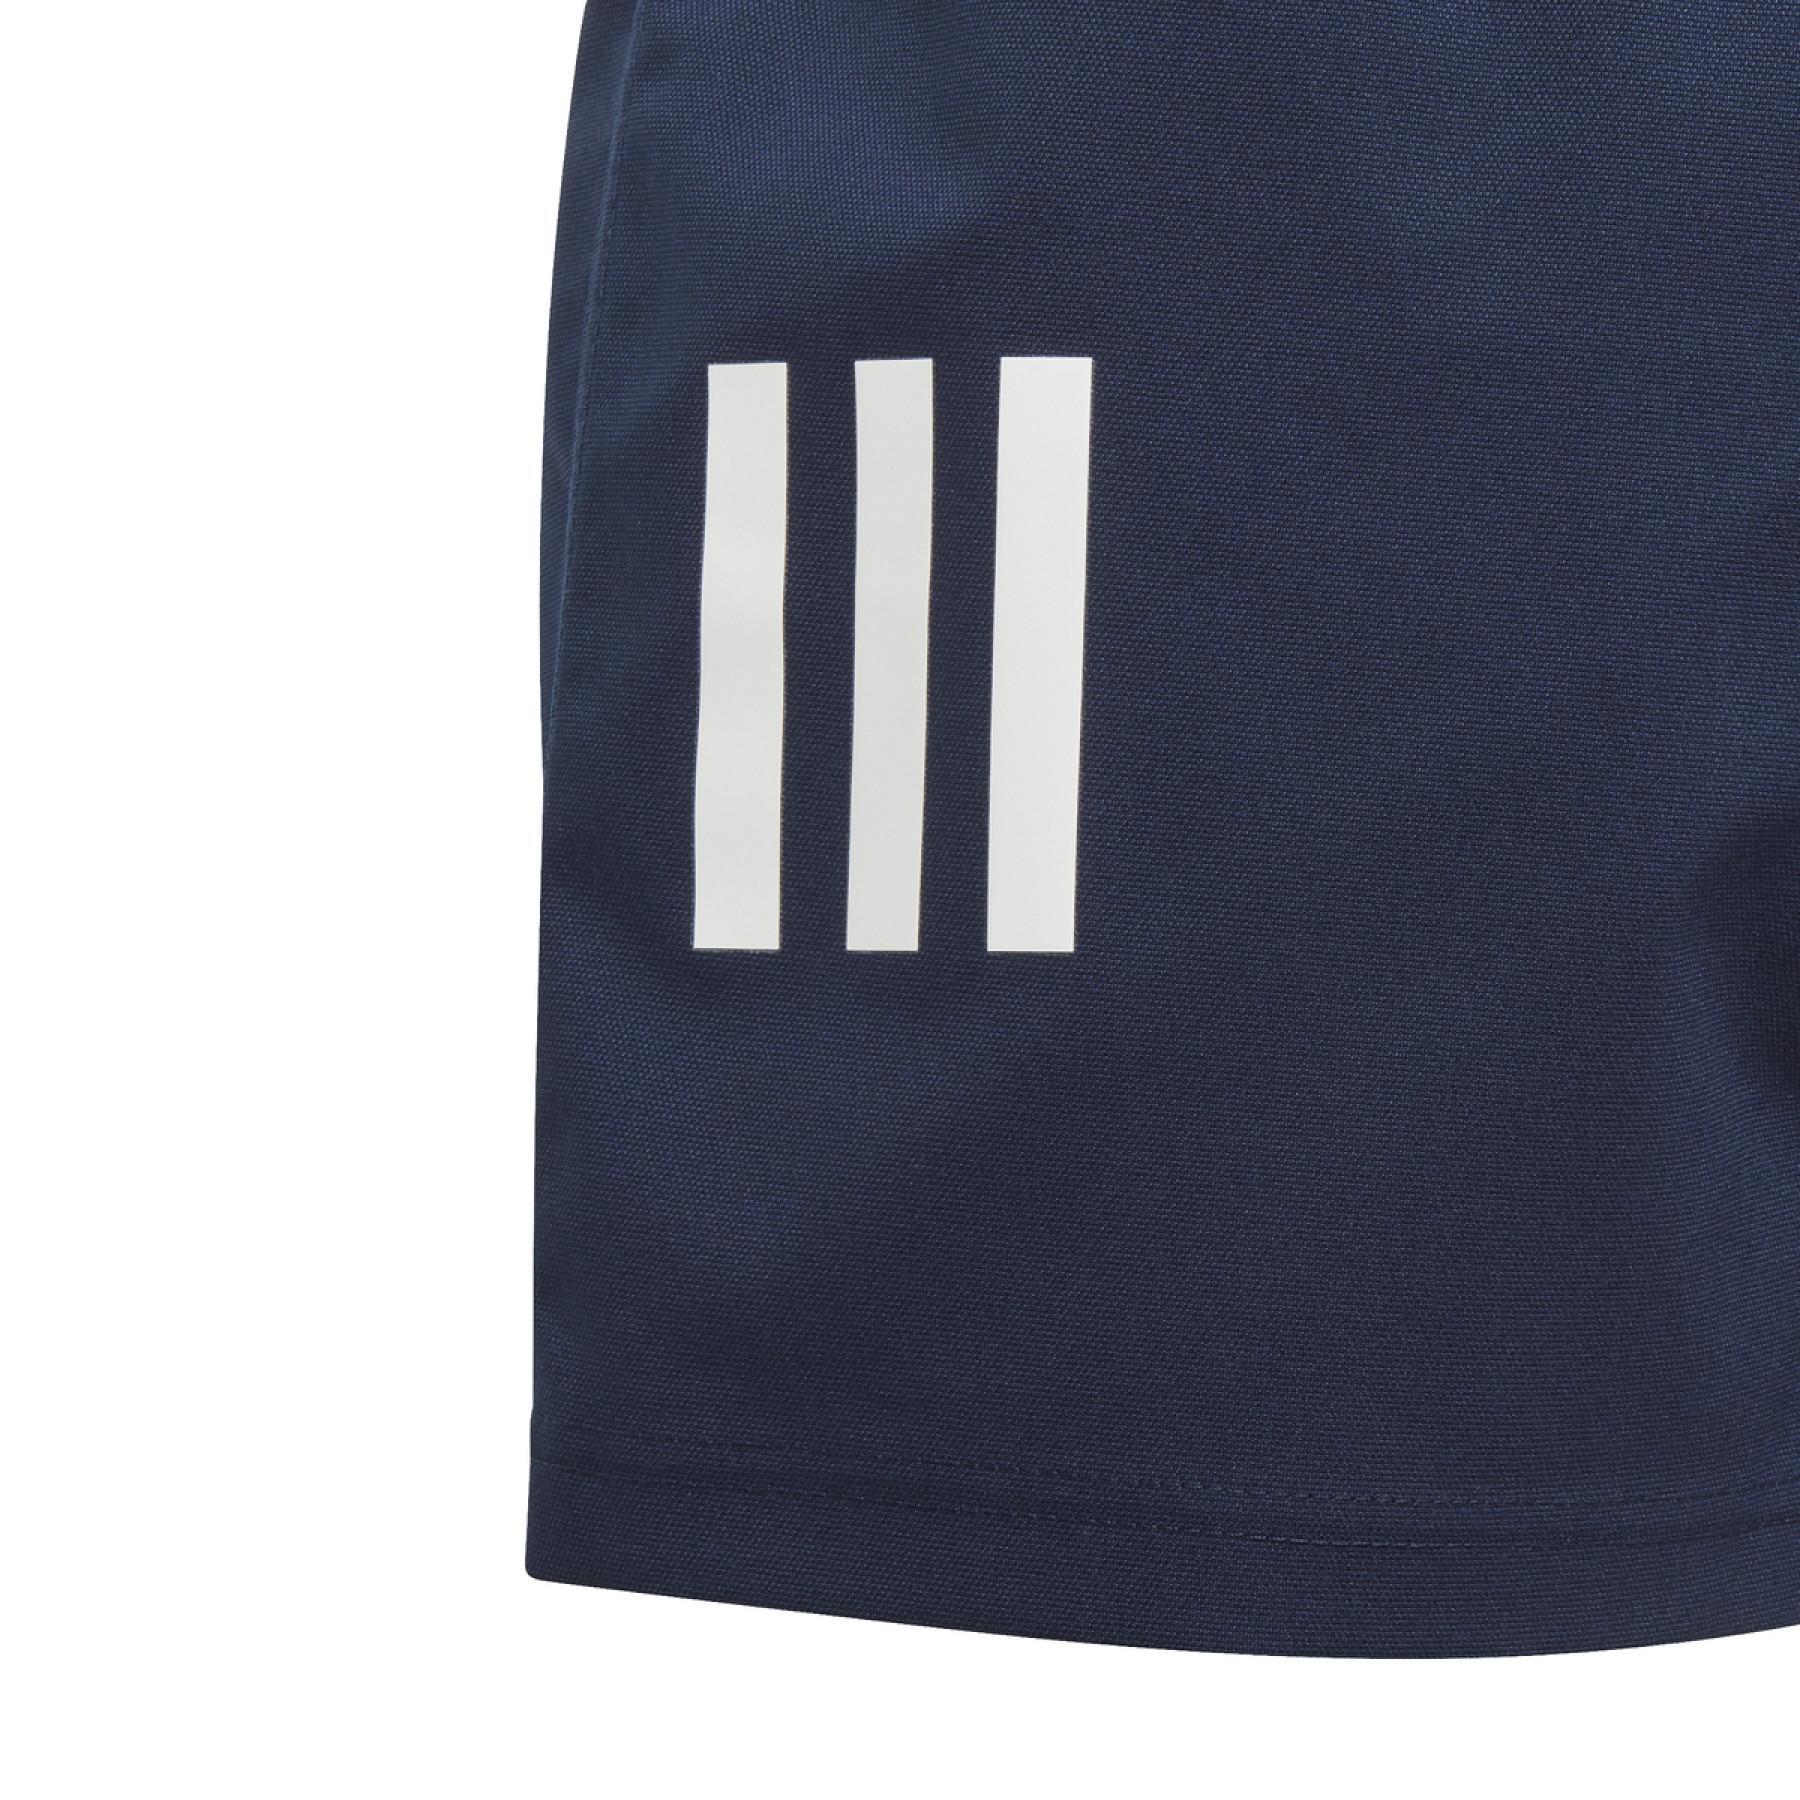 Children's shorts adidas Rugby 3-Bandes